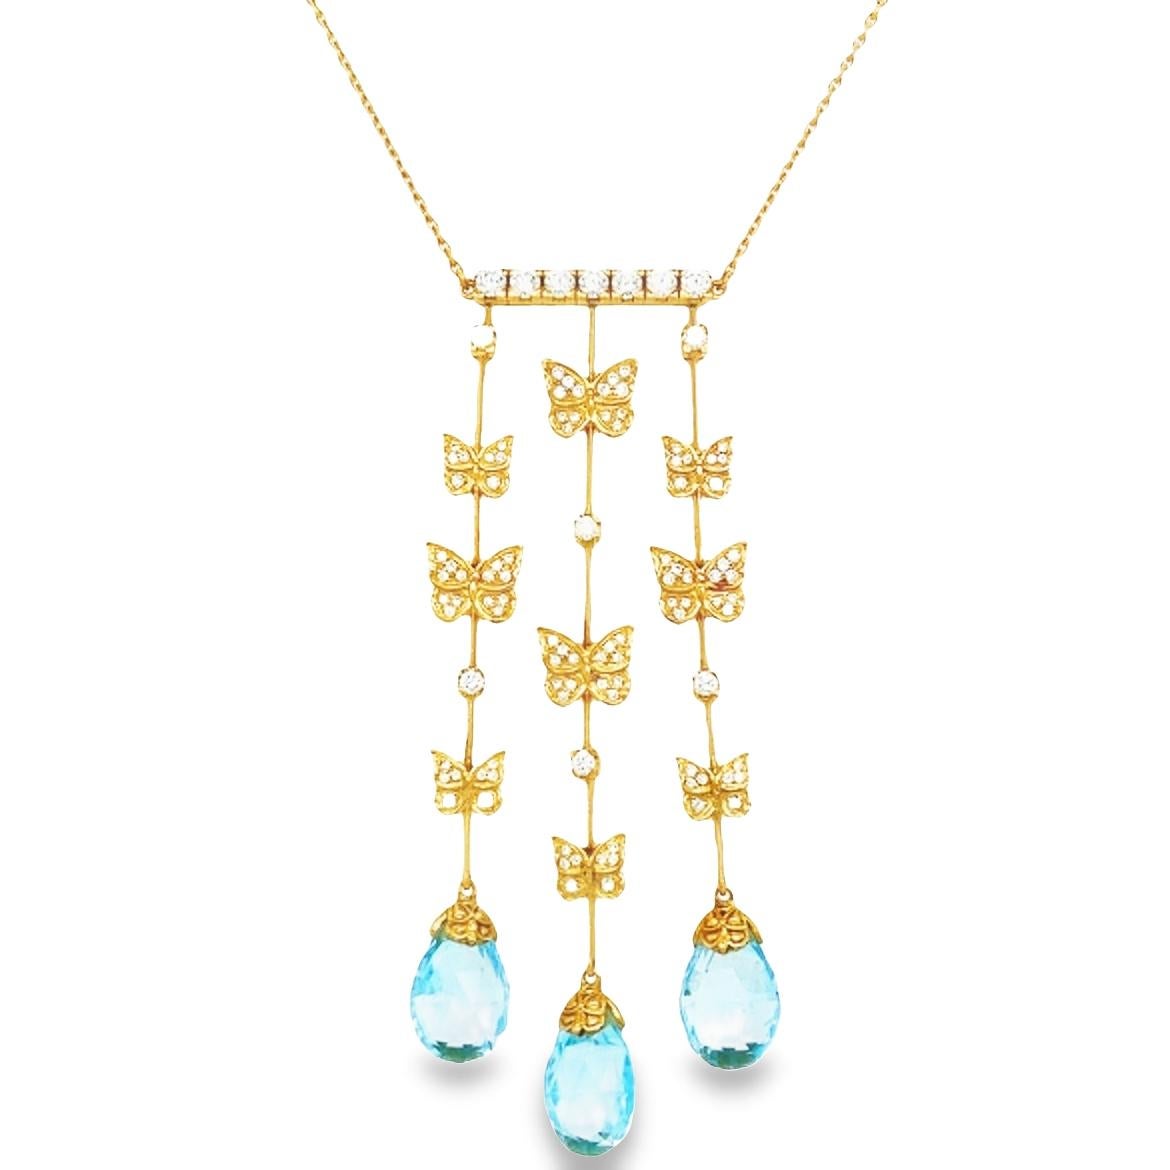      Beautiful necklace and earring set crafted by famed designer Carrera Y Carrera. The set is crafted in 18k yellow gold and is from the Butterfly collection. The set shows a butterfly theme as diamond and topaz gemstones highlight this one of a